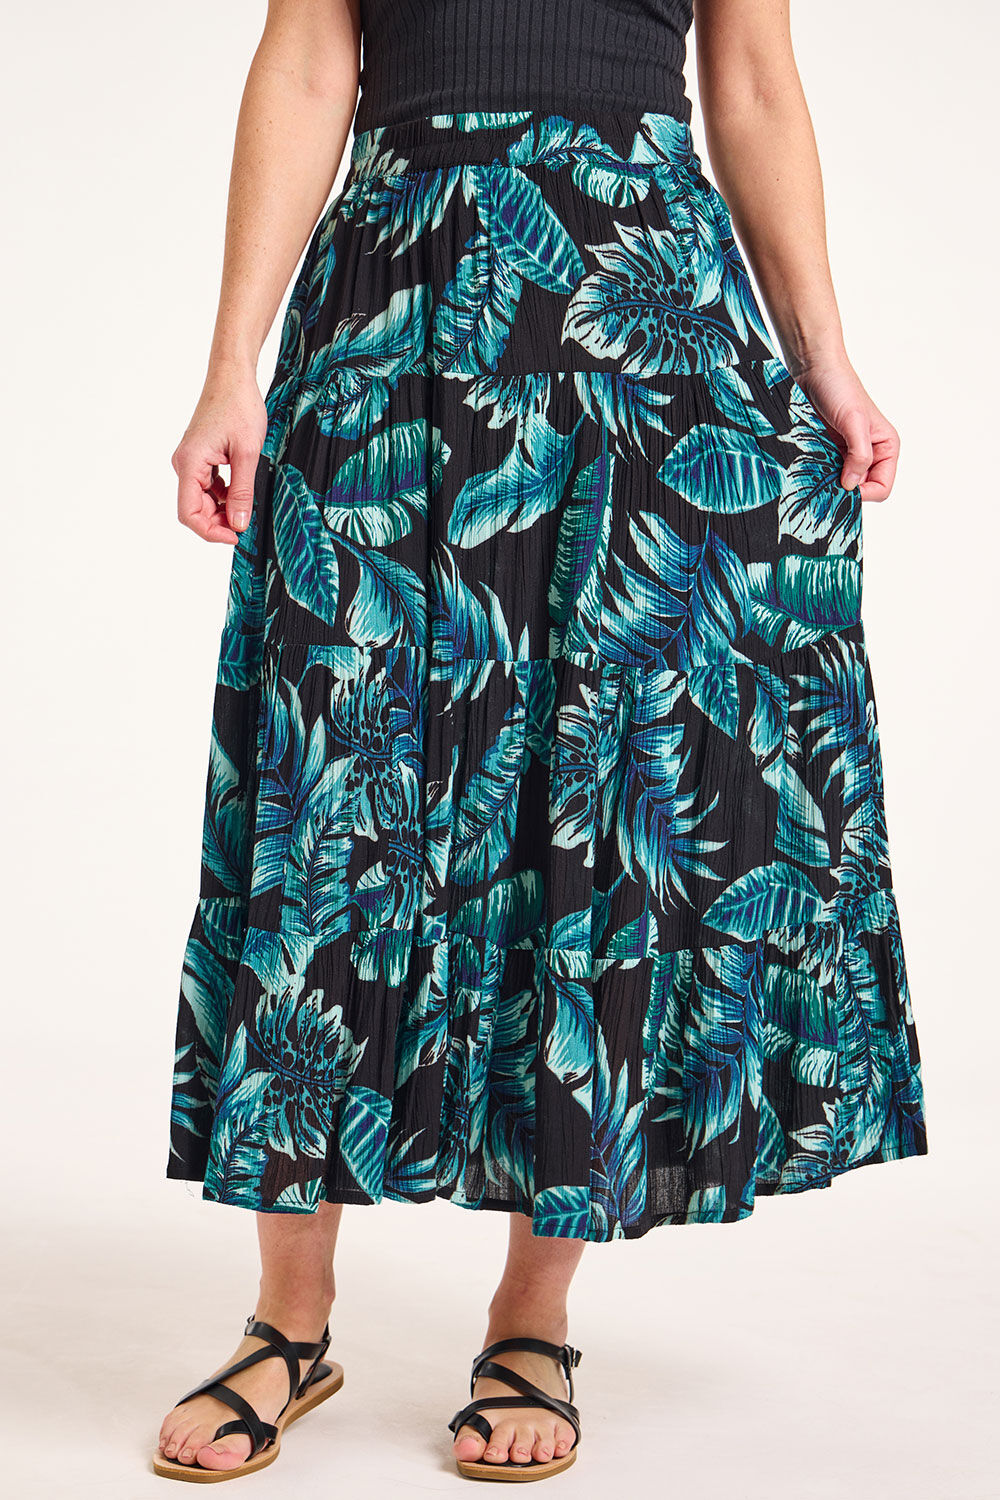 Bonmarche Black Palm Print Tiered Elasticated Crinkle Skirt, Size: 16